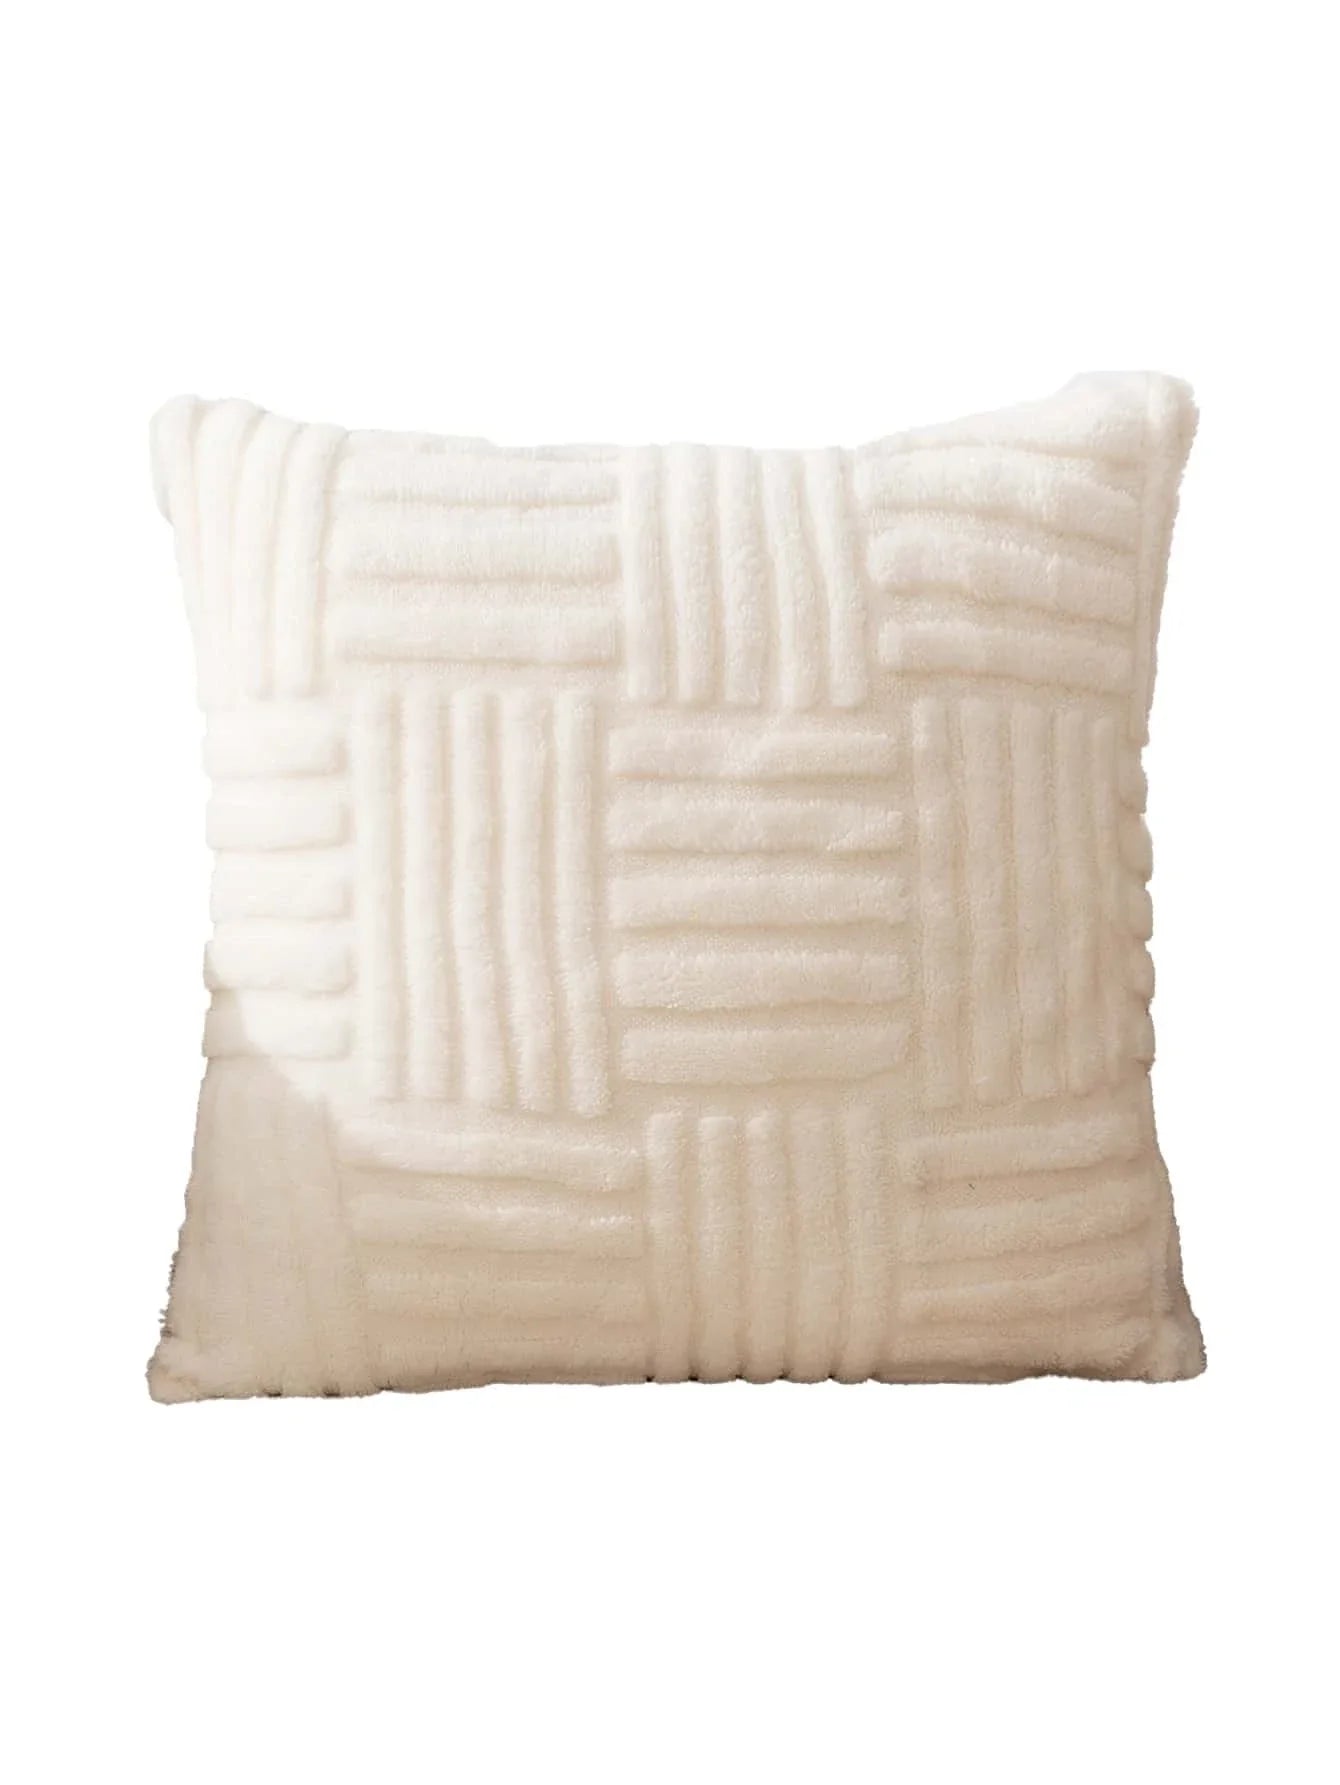 Buy Shein 1pc Geometric Jacquard Cushion Cover Without Filler in Pakistan